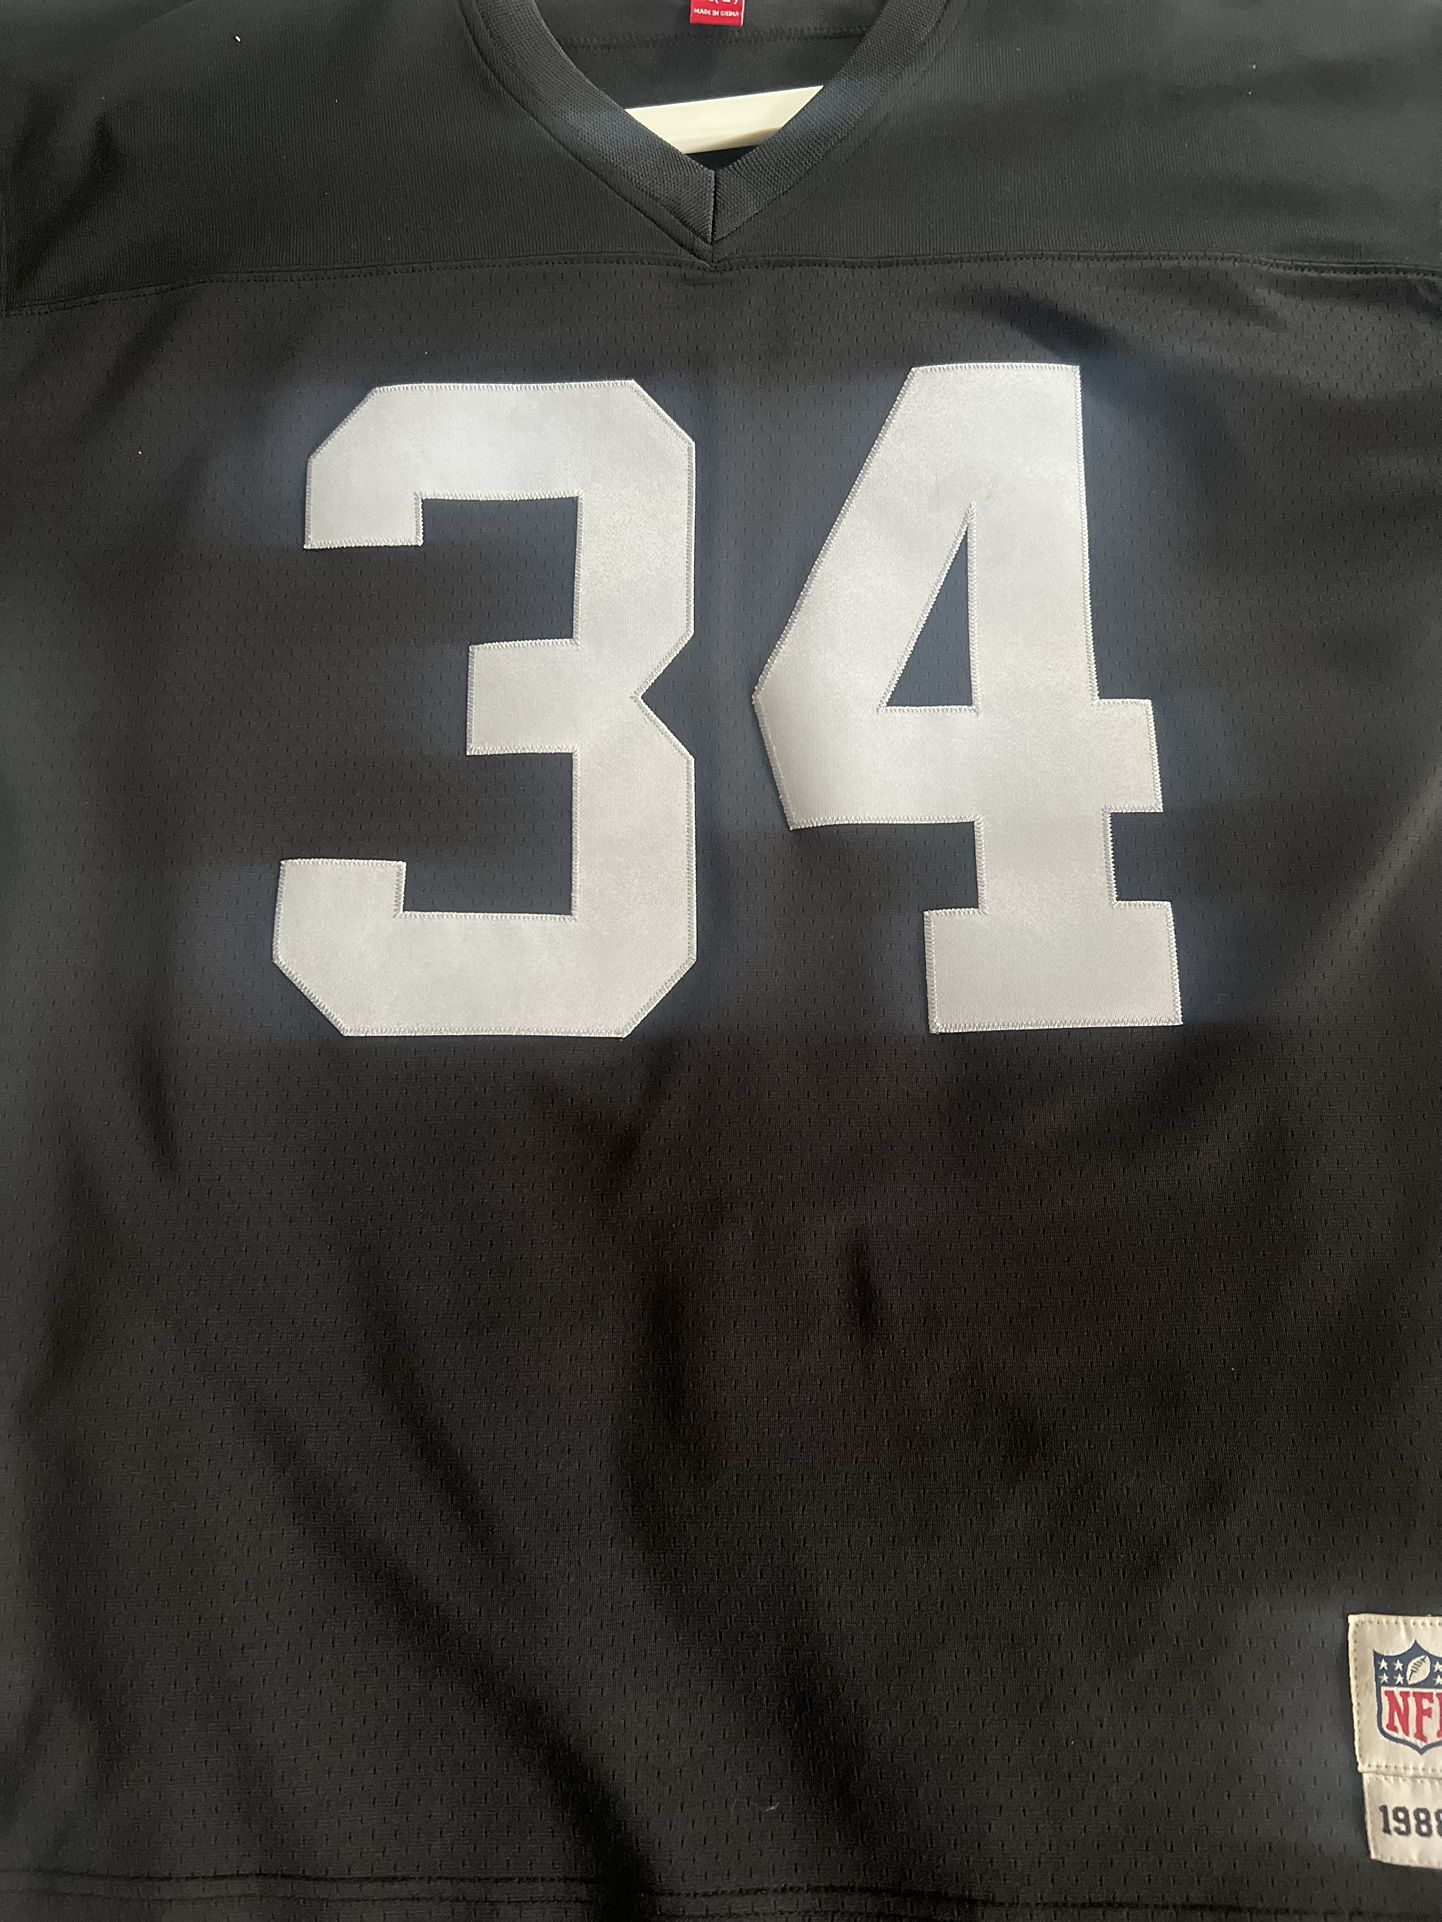 Mitchell And Ness 1988 Bo Jackson Throwback Jersey for Sale in Moreno  Valley, CA - OfferUp